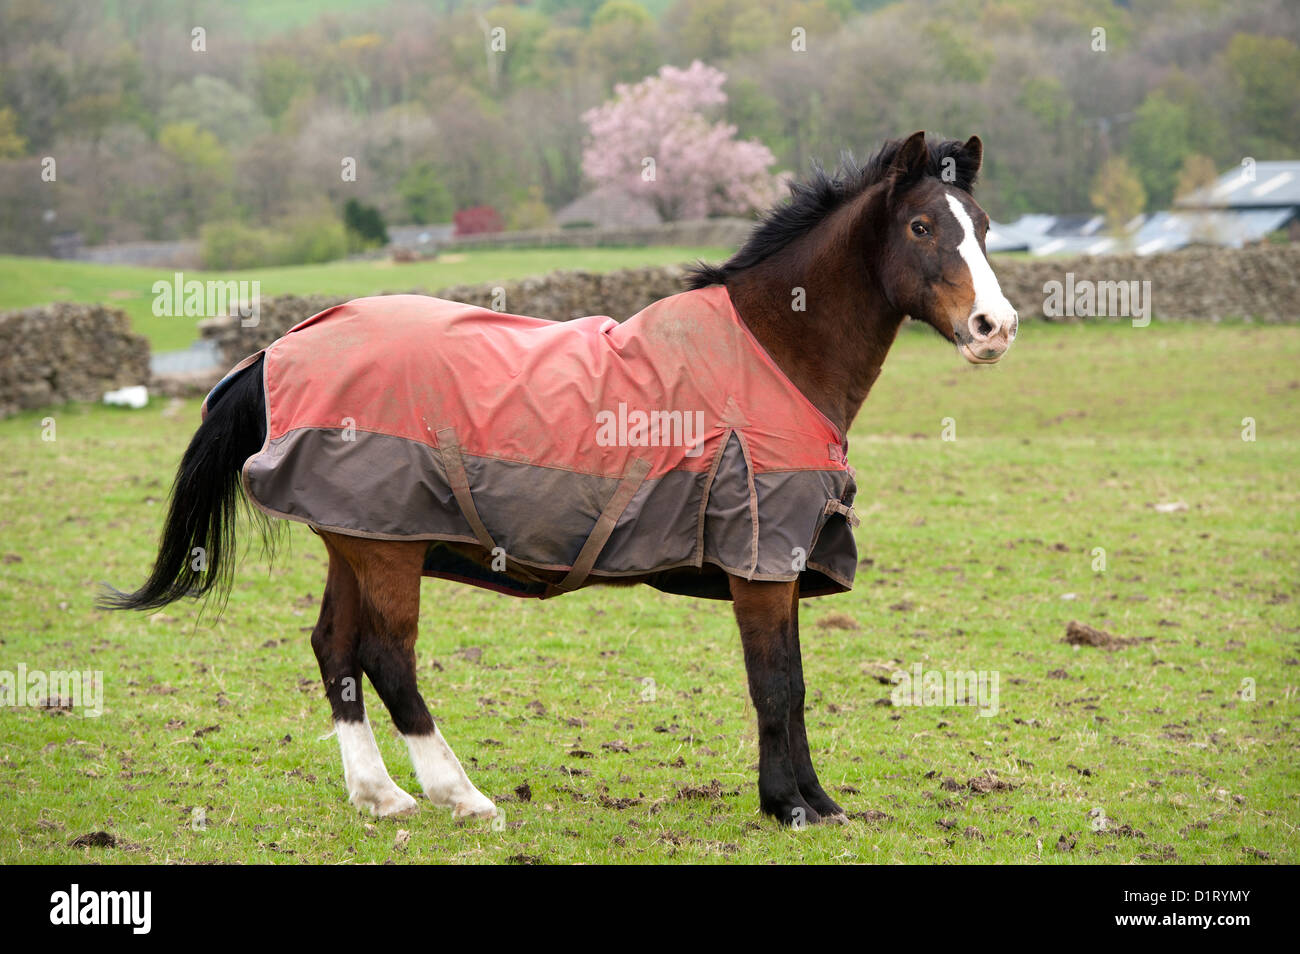 Chestnut horse with blanket on out in field on a cold spring morning. Cumbria, UK Stock Photo